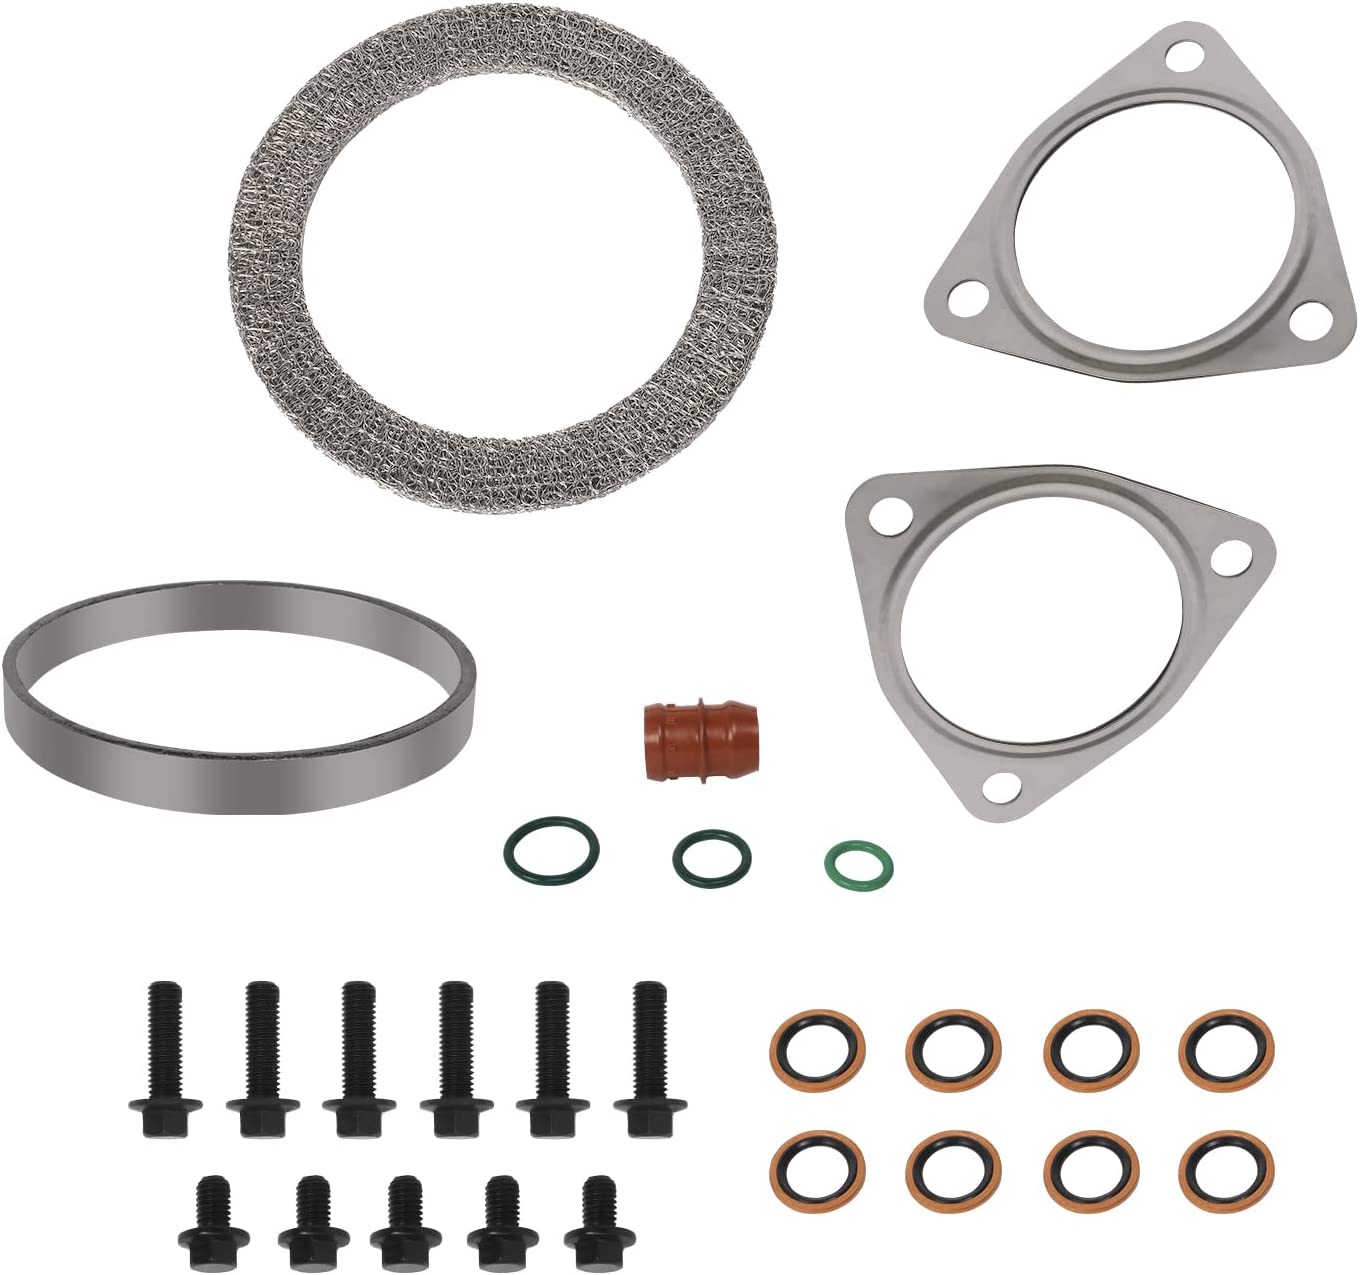 (Out of Stock) Turbo Install Turbocharger Gasket Kit Set Fit 2008-2010 Ford 6.4L